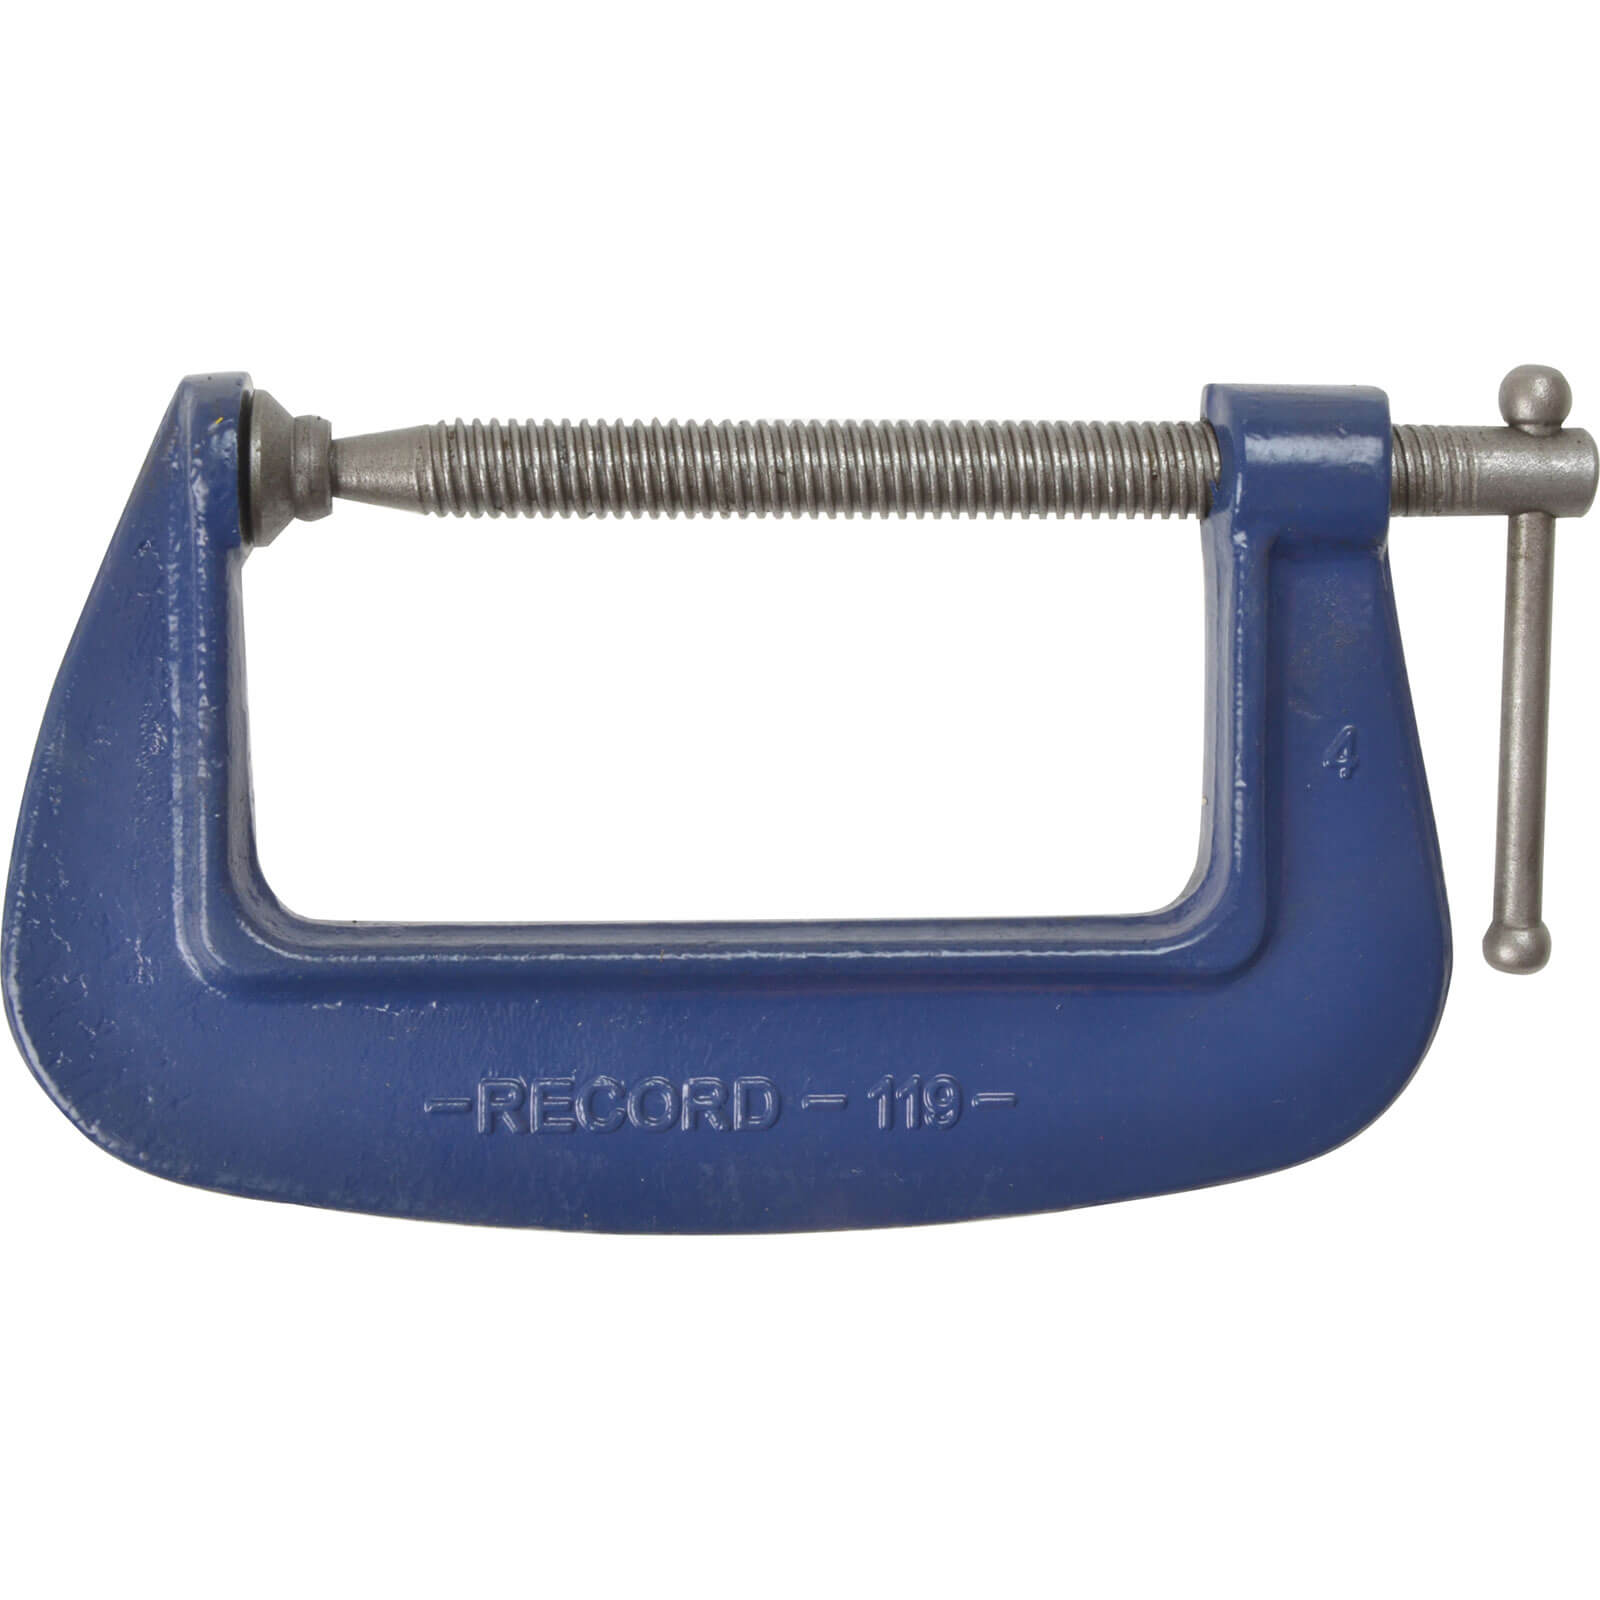 Photo of Irwin Record 119 G Clamp 100mm